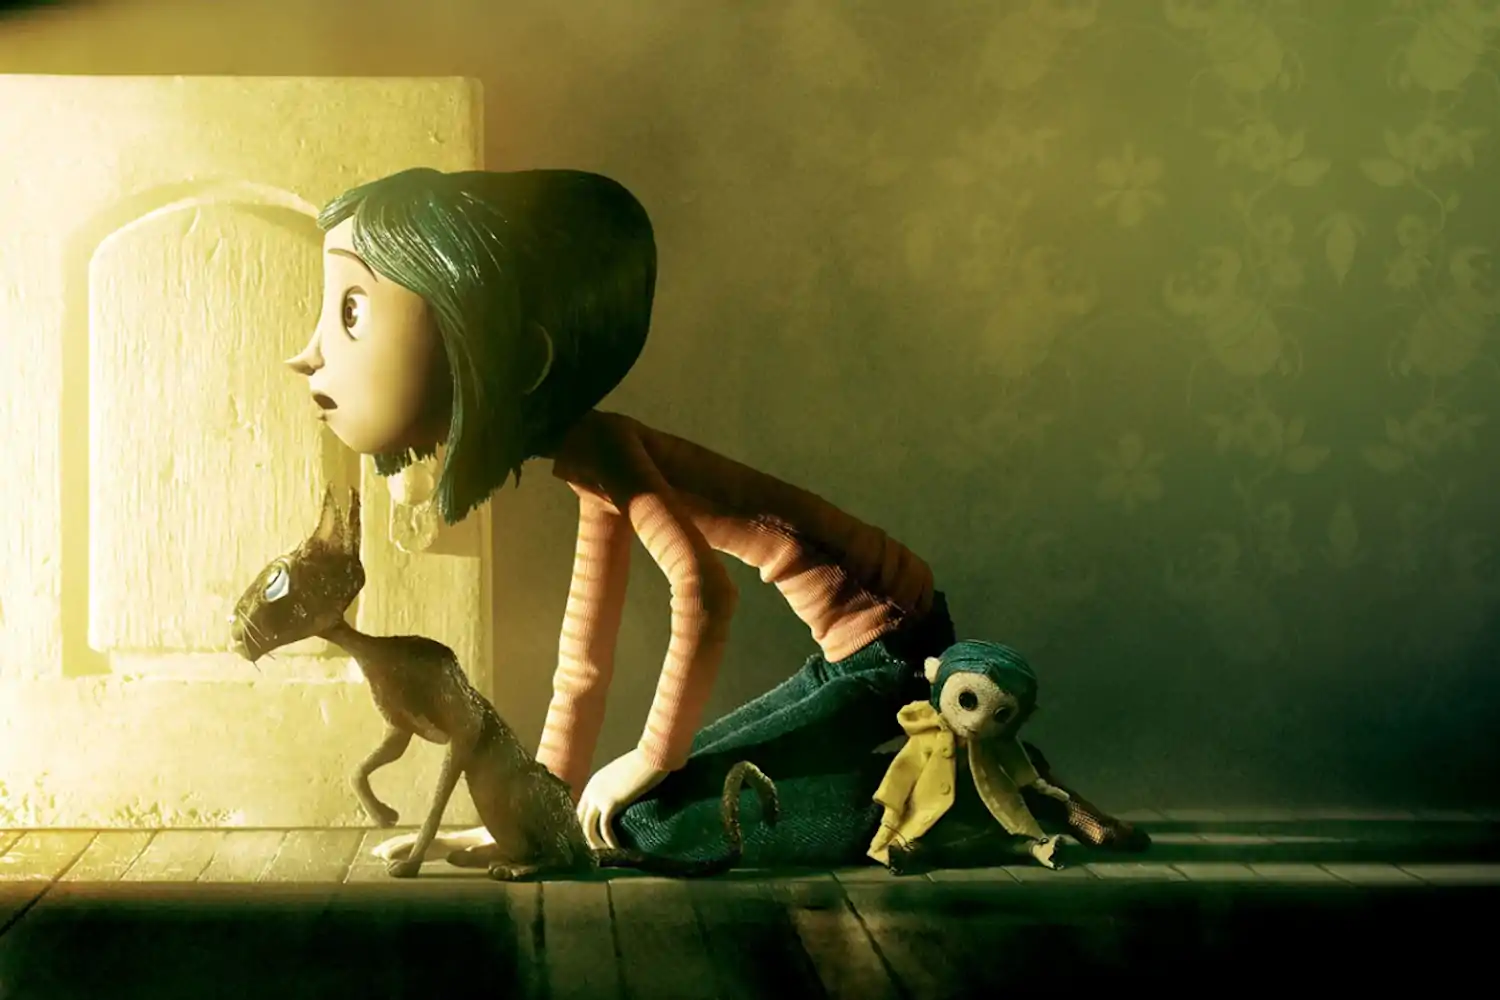 Coraline on the verge of entering a new world